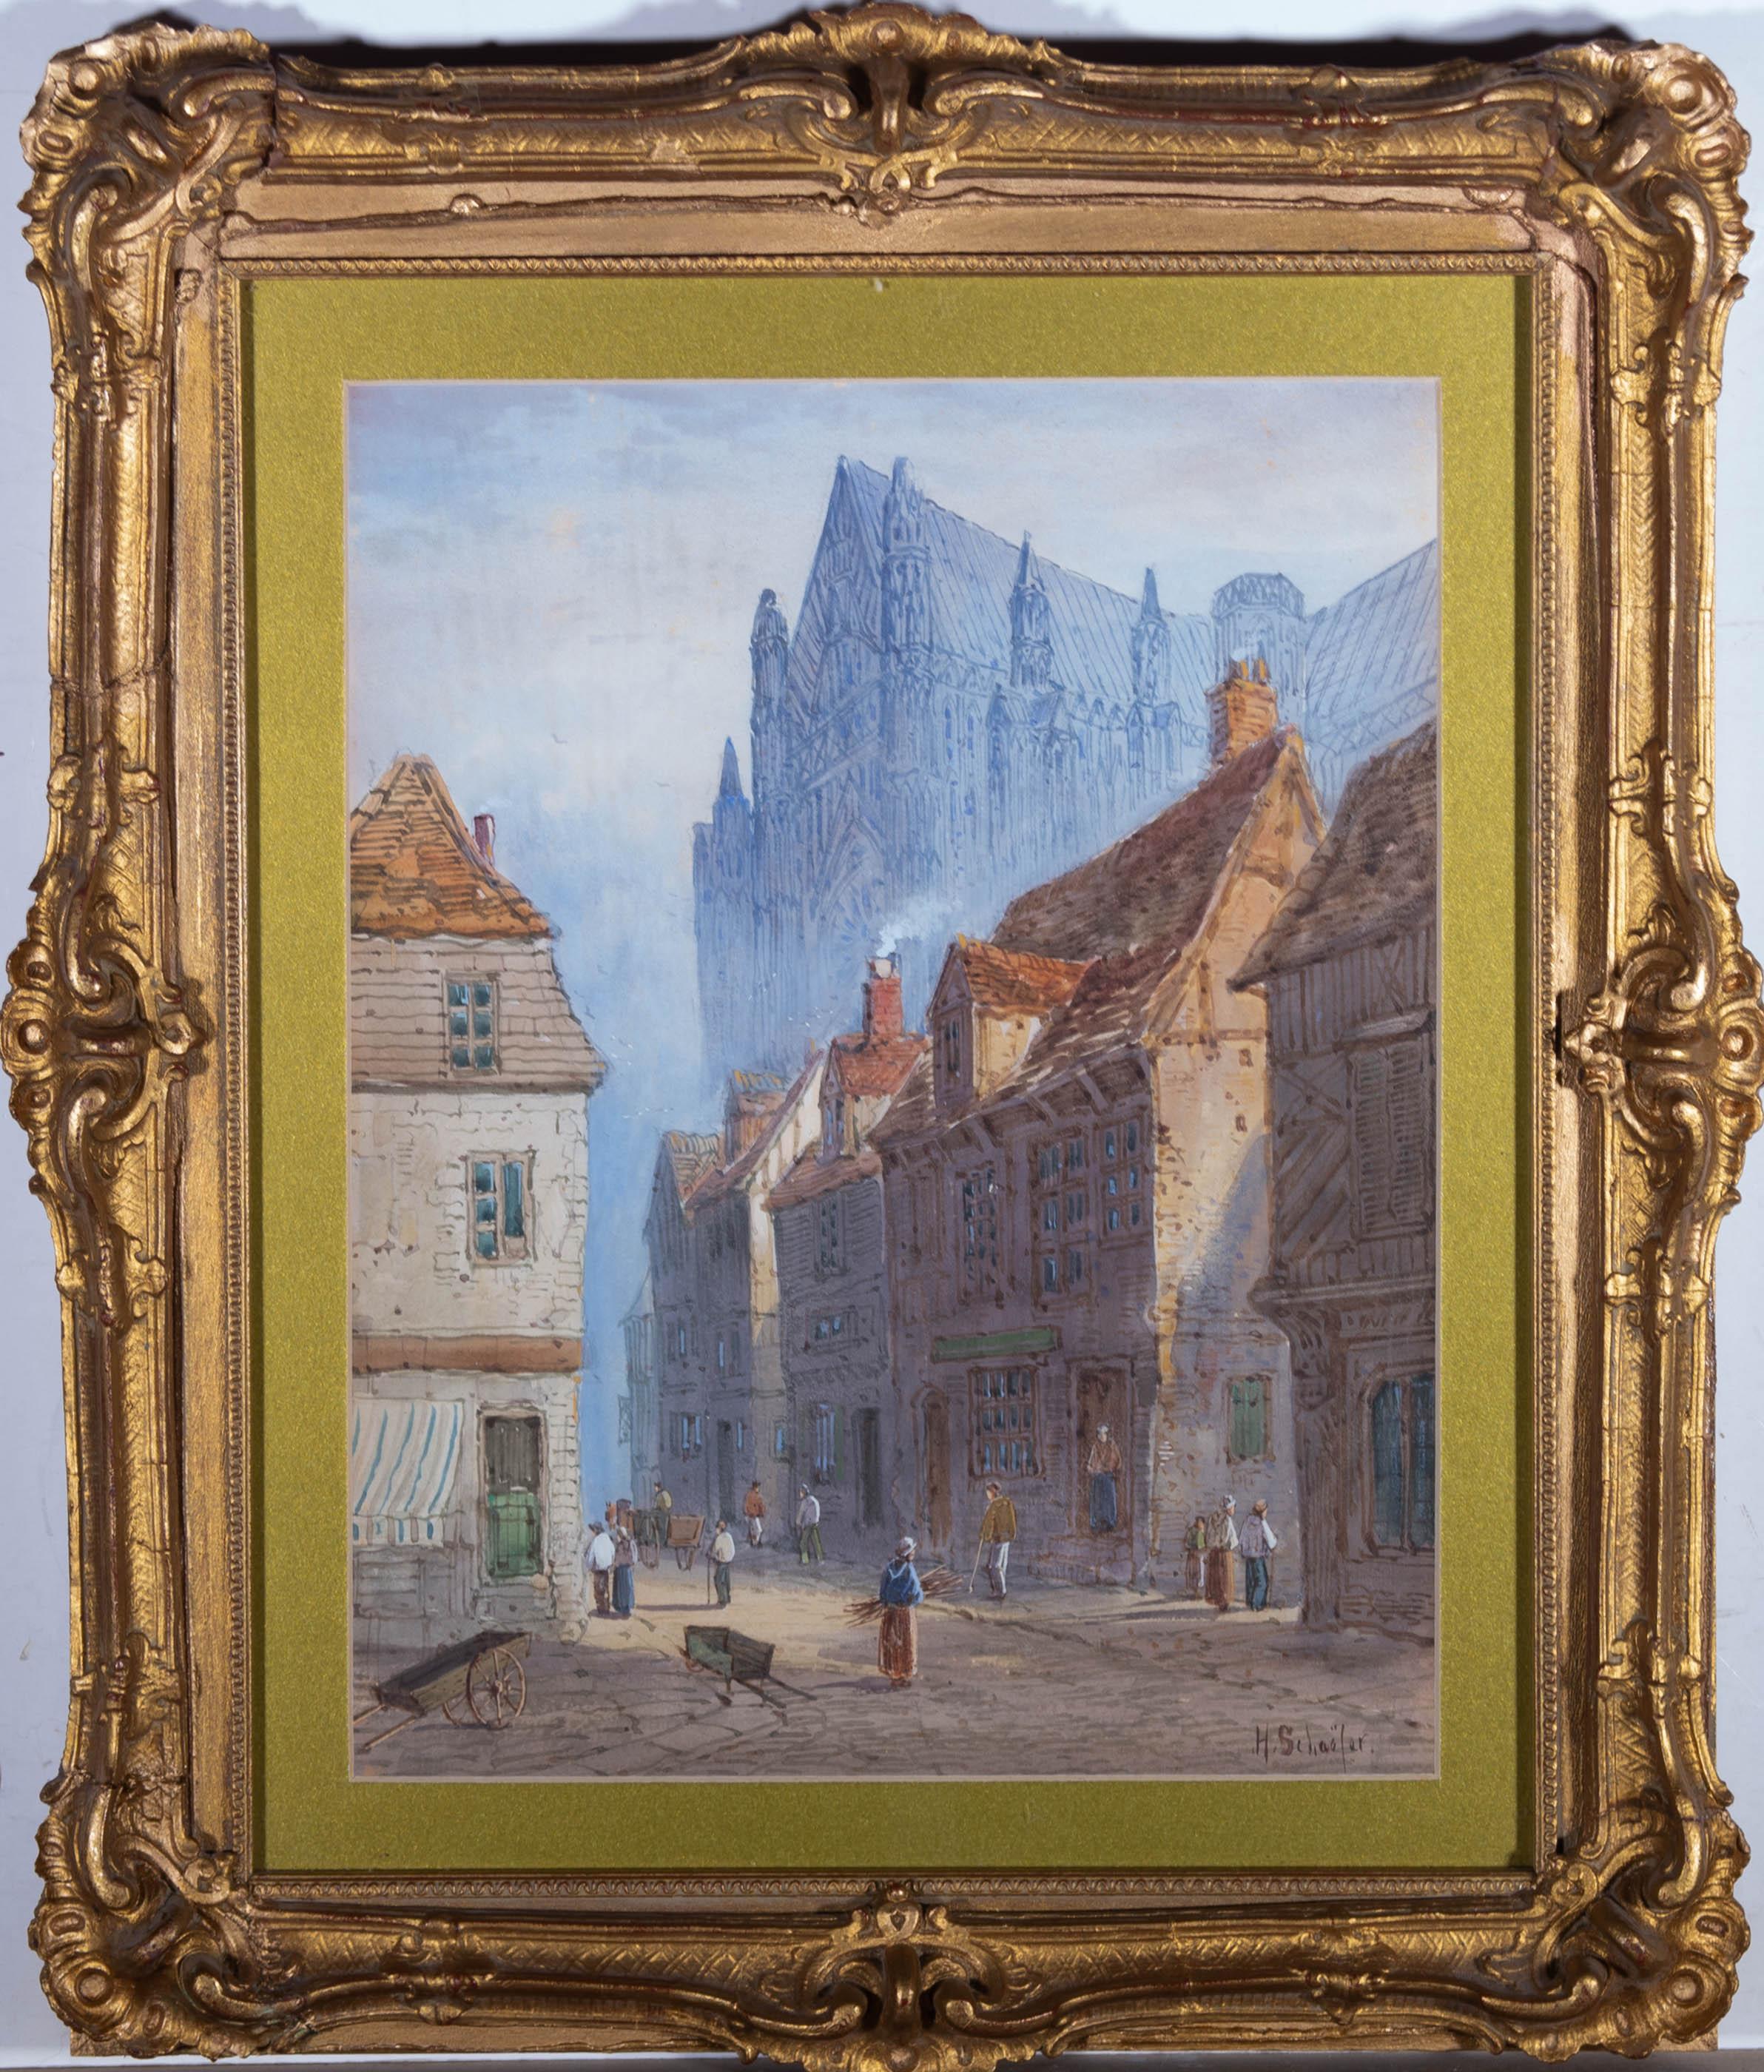 This charming scene depicts a cobbled street filled with figures completing daily tasks. A grand cathedral sits in the background of the scene, towering over the town houses and shops. The artist has captured this continental town in fine